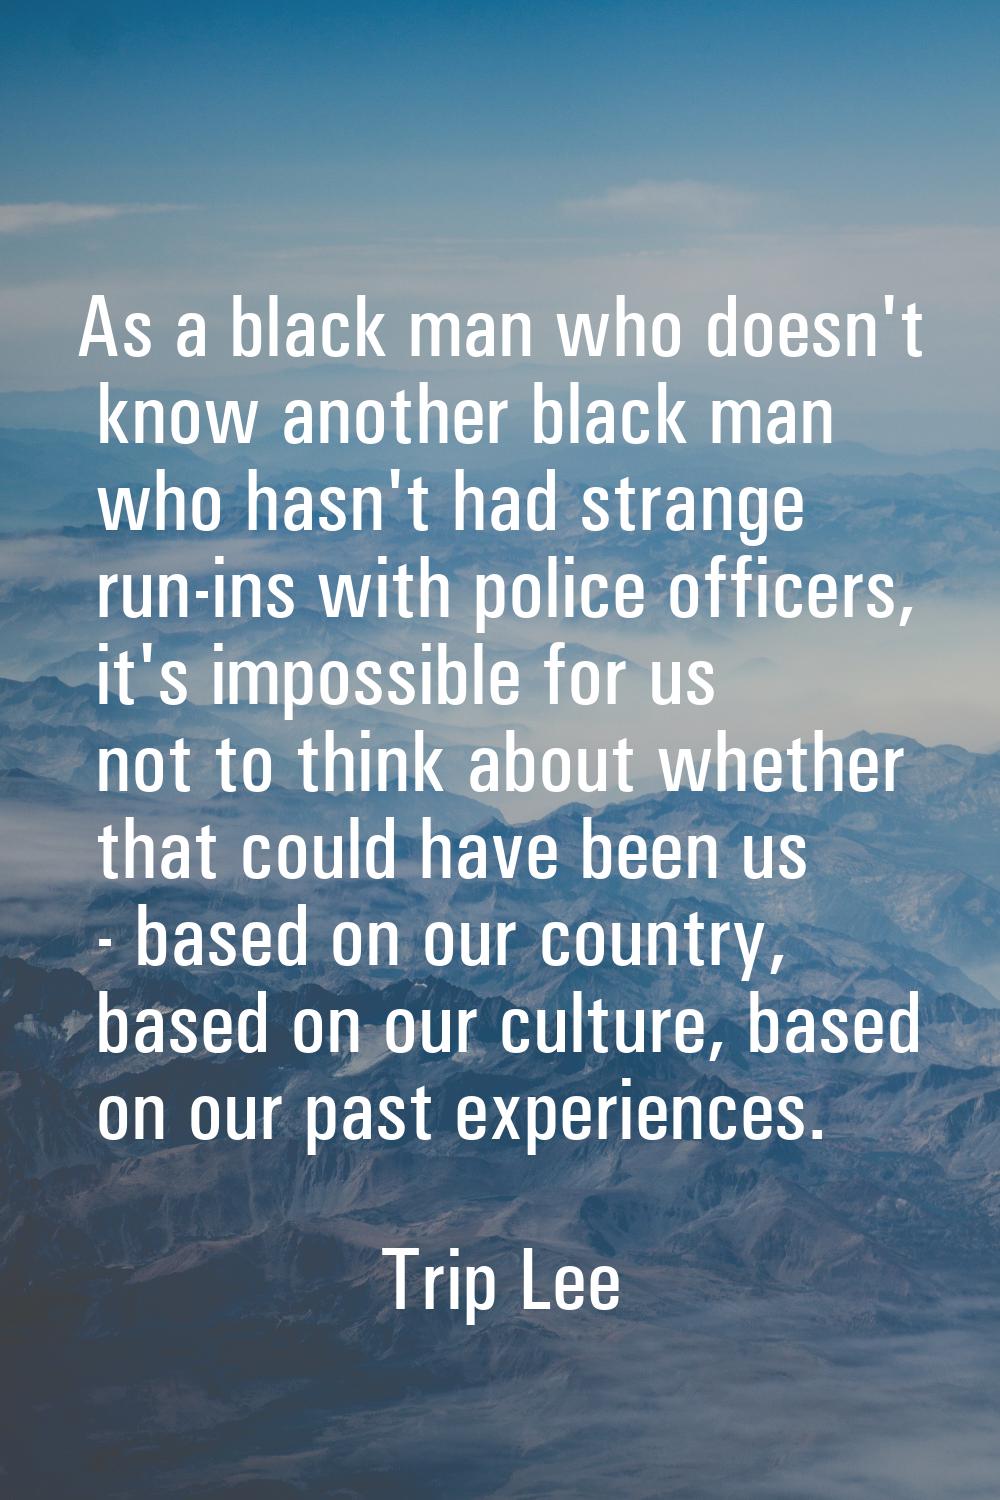 As a black man who doesn't know another black man who hasn't had strange run-ins with police office